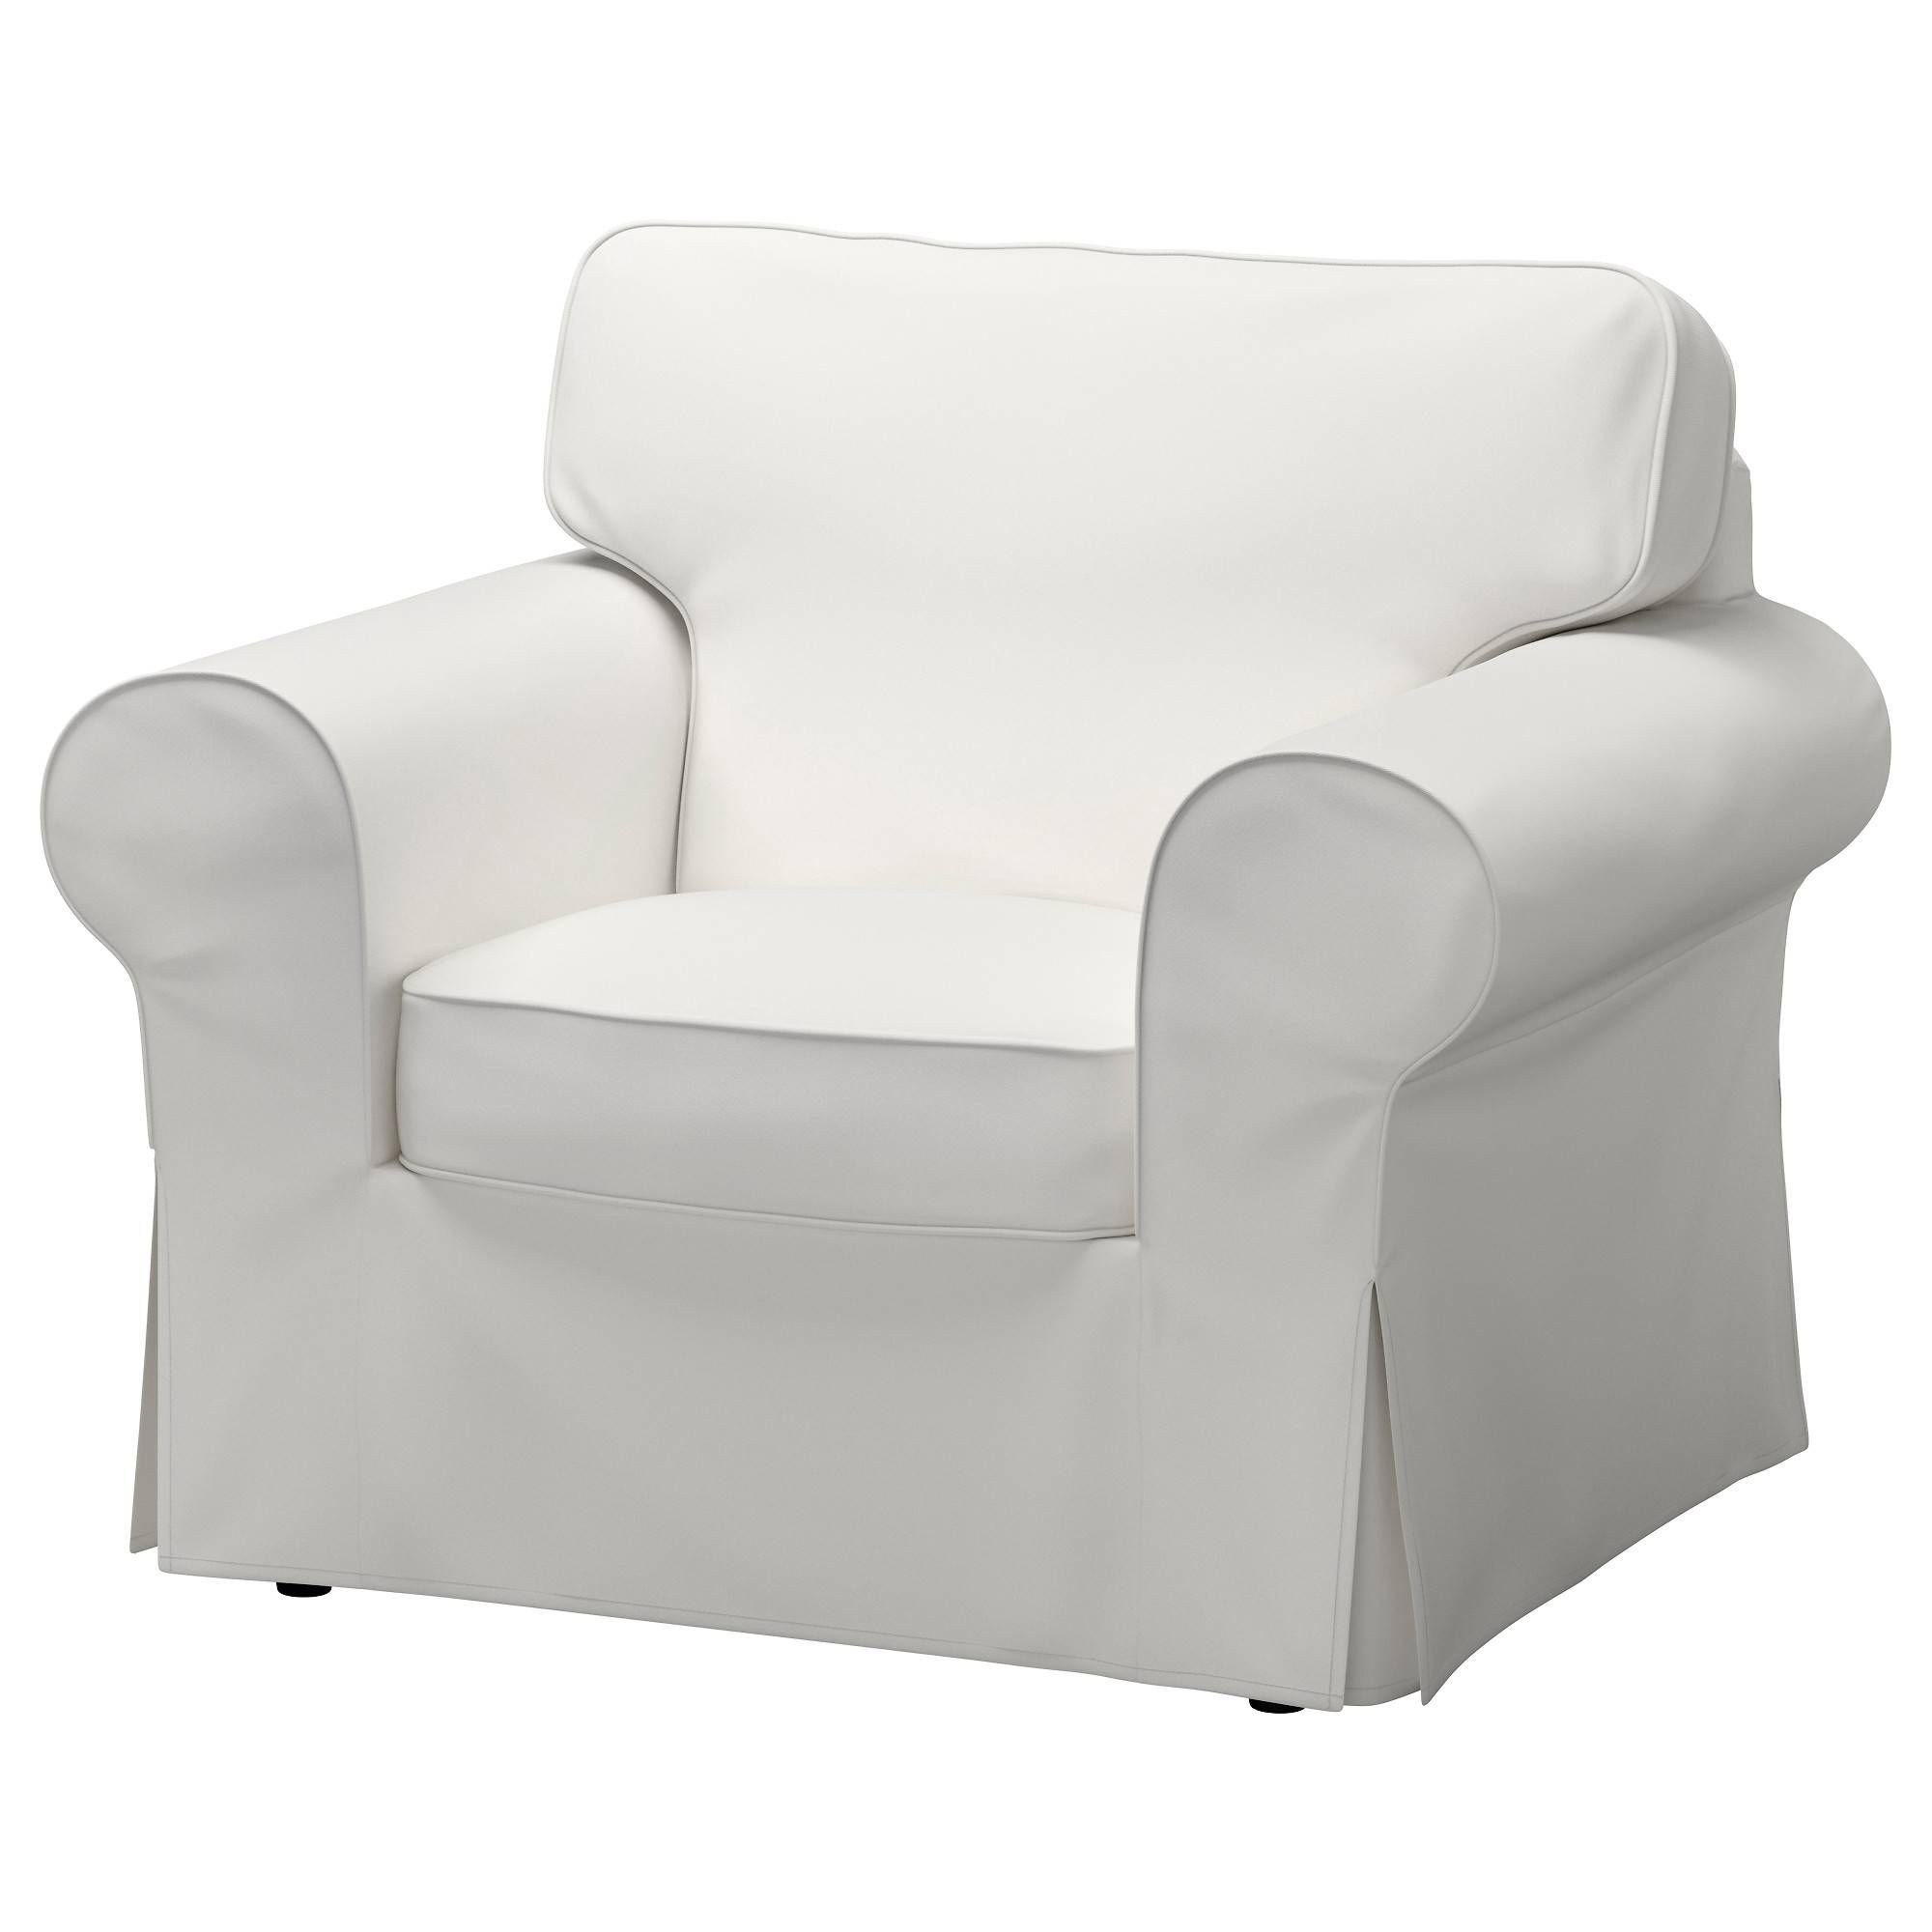 Armchairs – Traditional & Modern – Ikea In Small Armchairs (View 23 of 30)